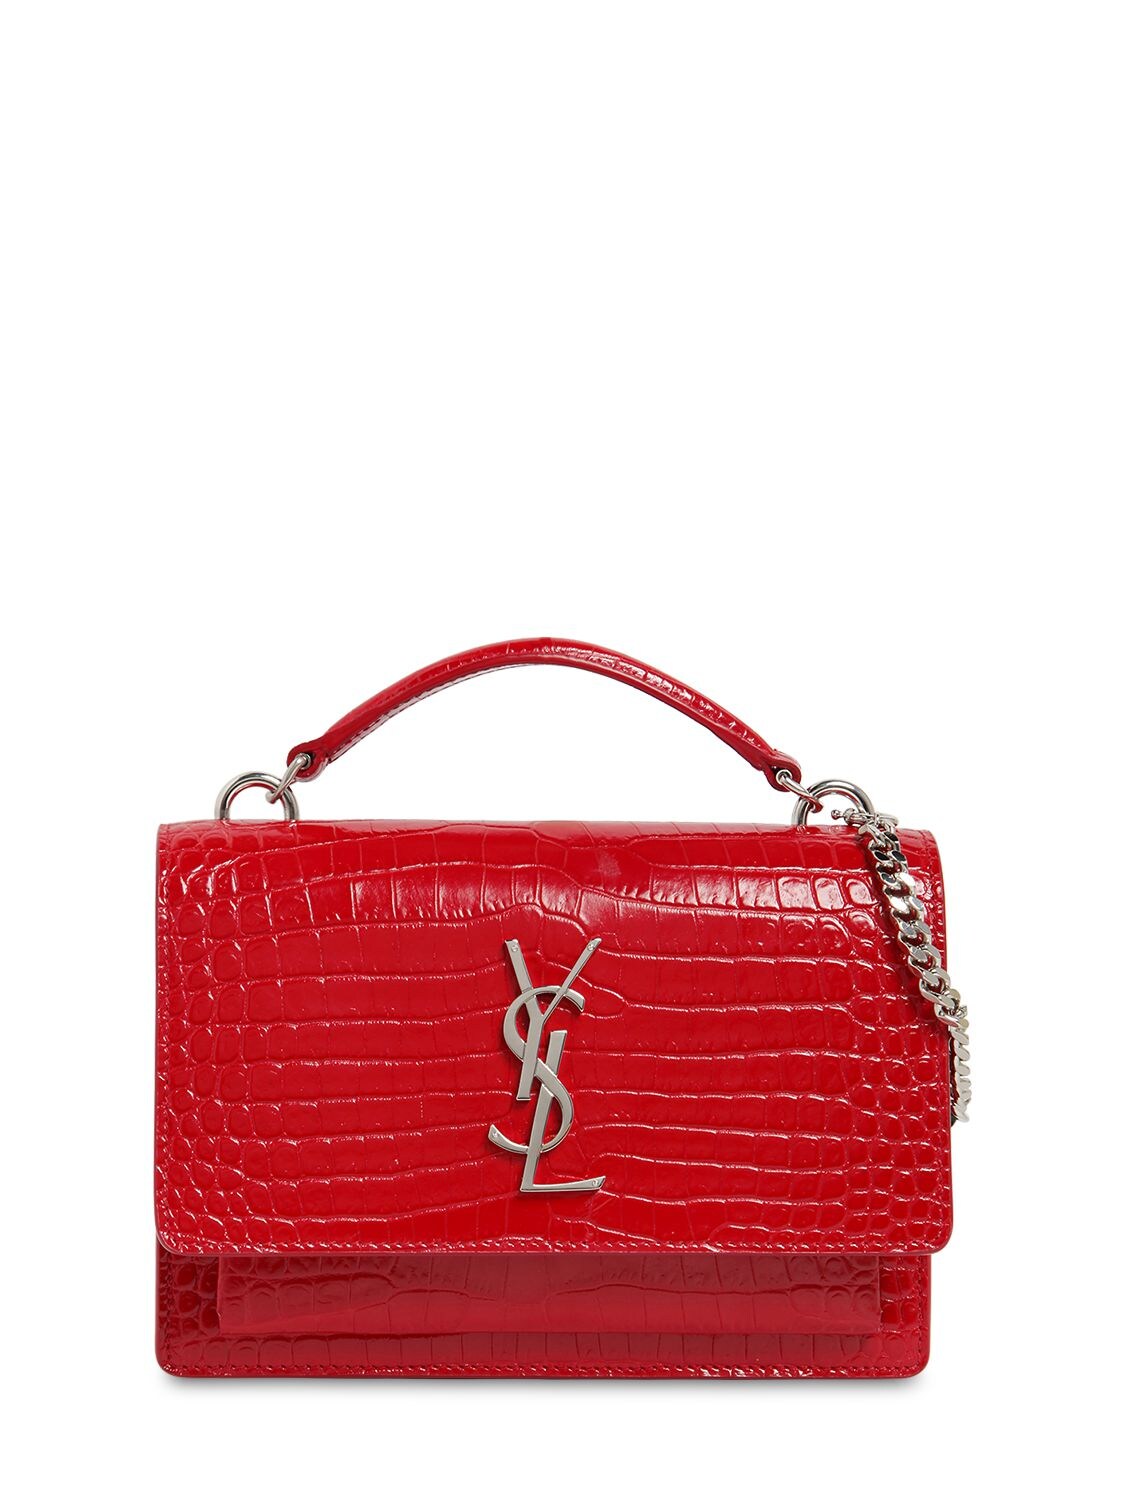 Saint Laurent Small Sunset Croc Embossed Leather Bag In Red